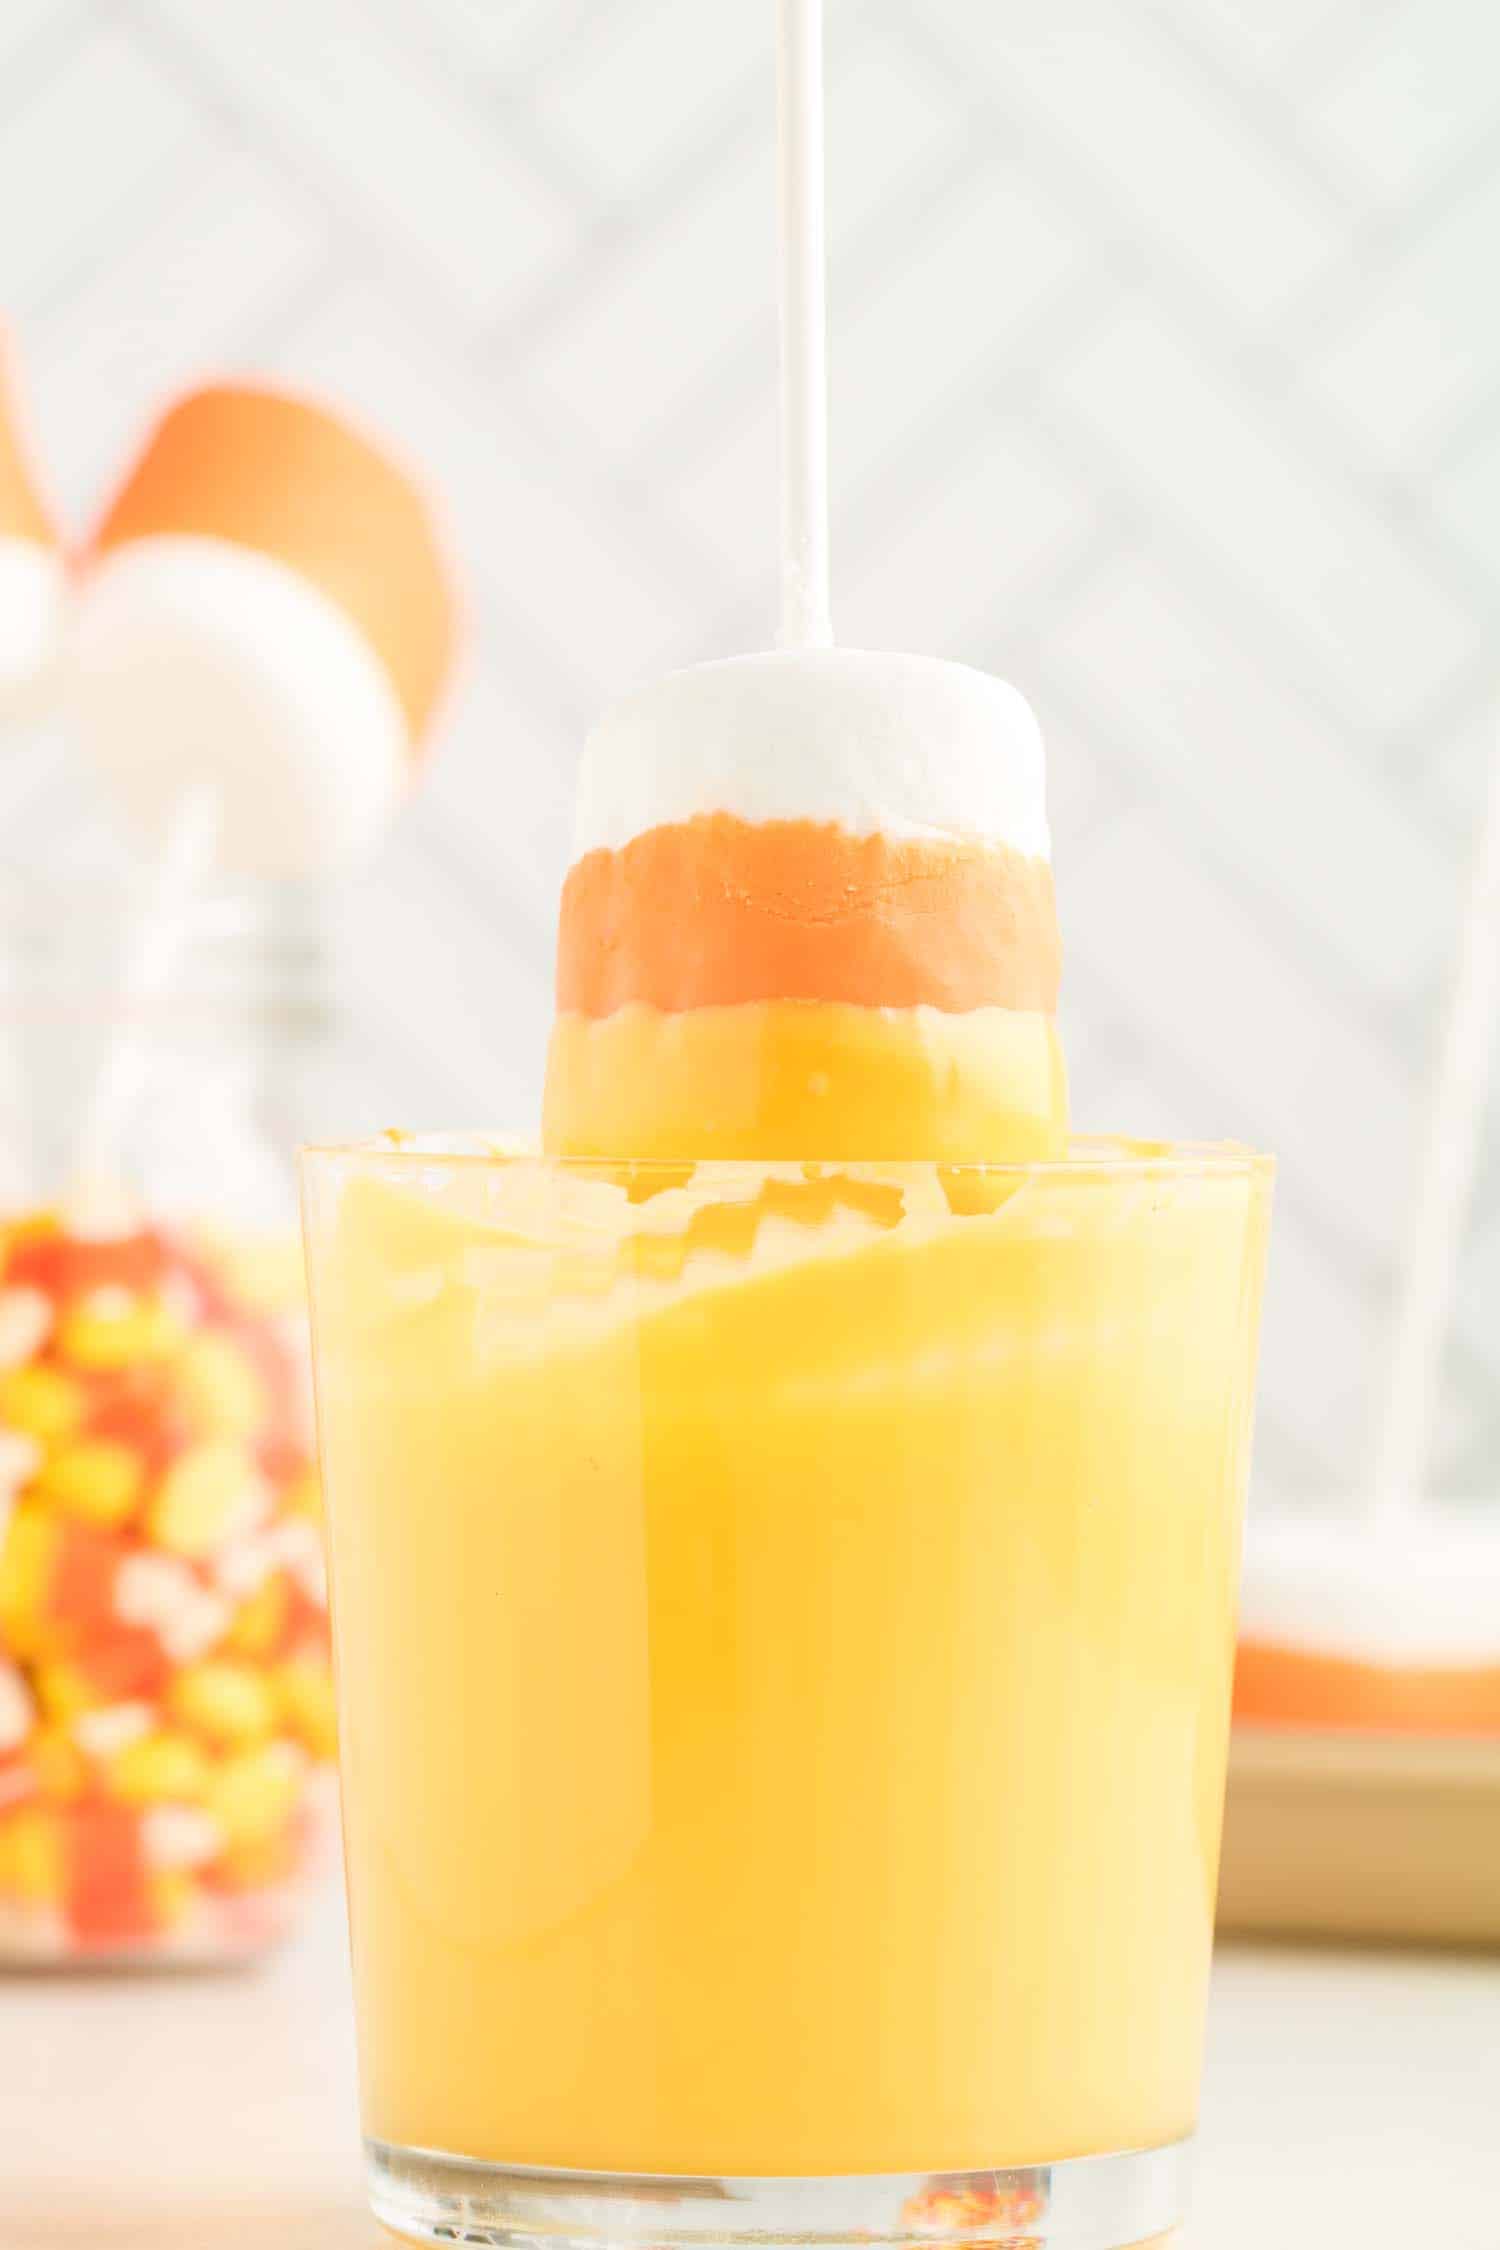 Candy corn marshmallow pops being dunked into yellow candy melts in a glass.